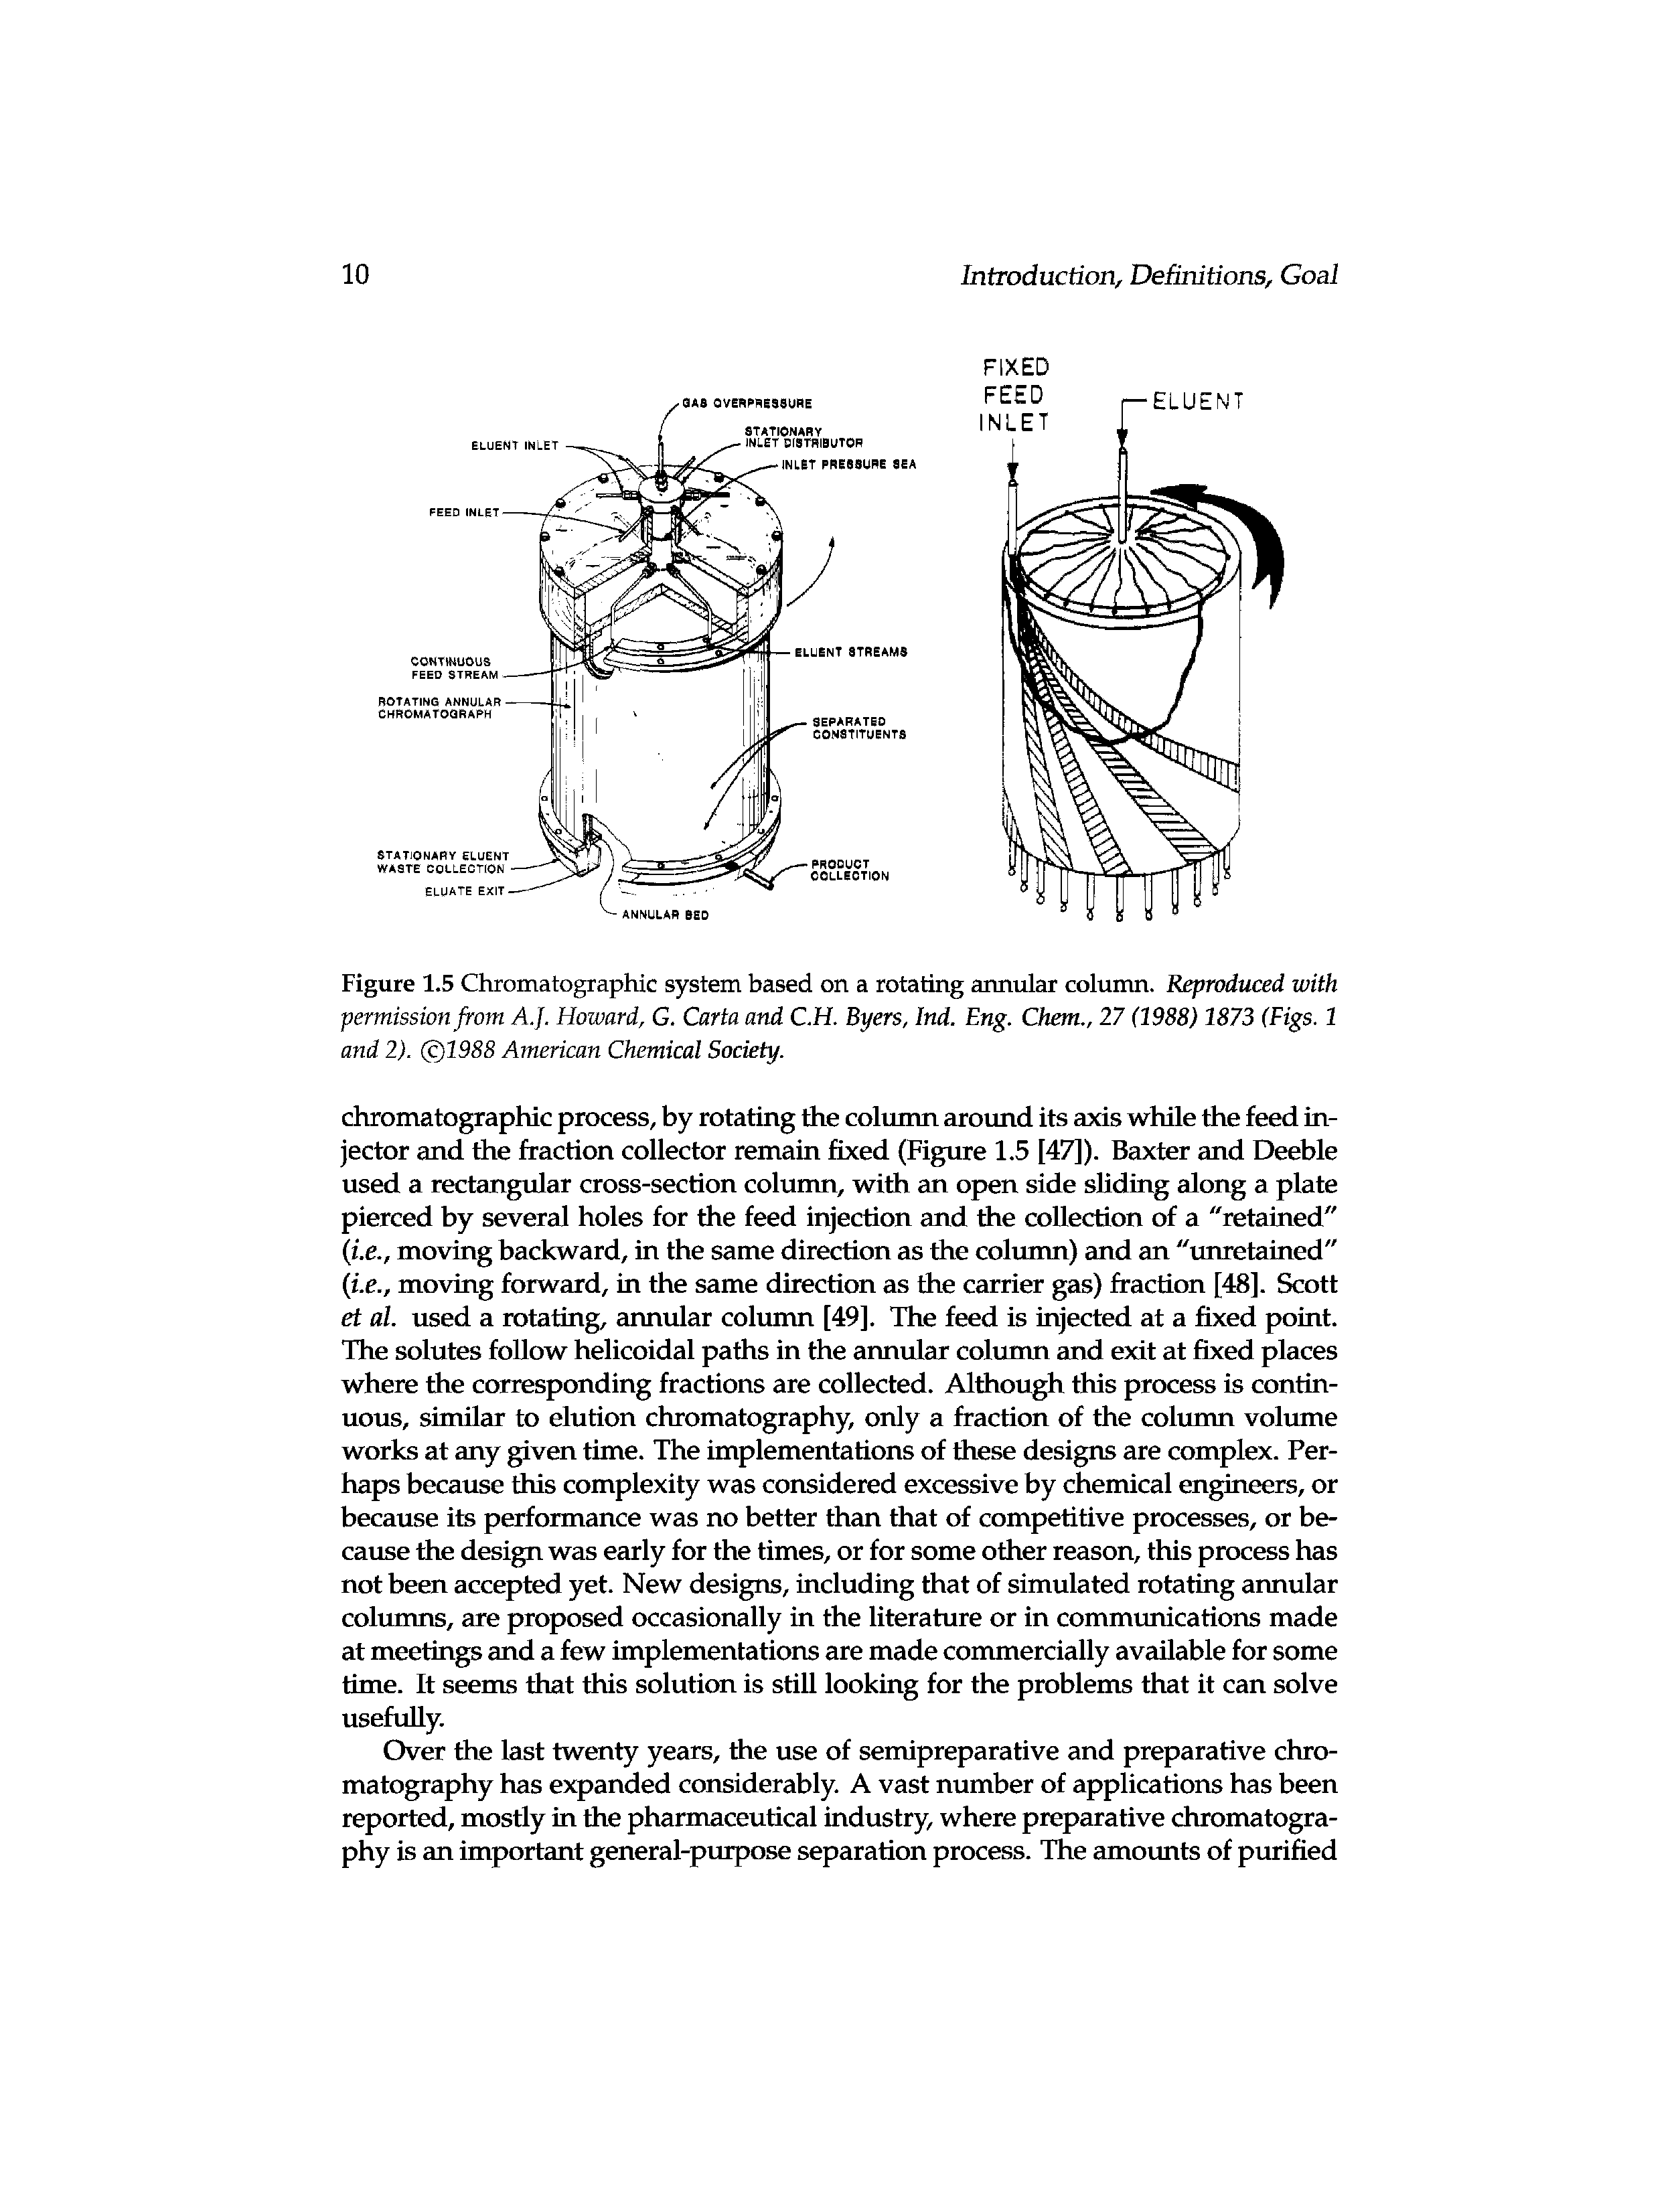 Figure 1.5 Chromatographic system based on a rotating annular column. Reproduced with permission from A.. Howard, G. Carta and C.H. Byers, Ind. Eng. Chem., 27 (1988) 1873 (Figs. 1 and 1). (c)1988 American Chemical Society.